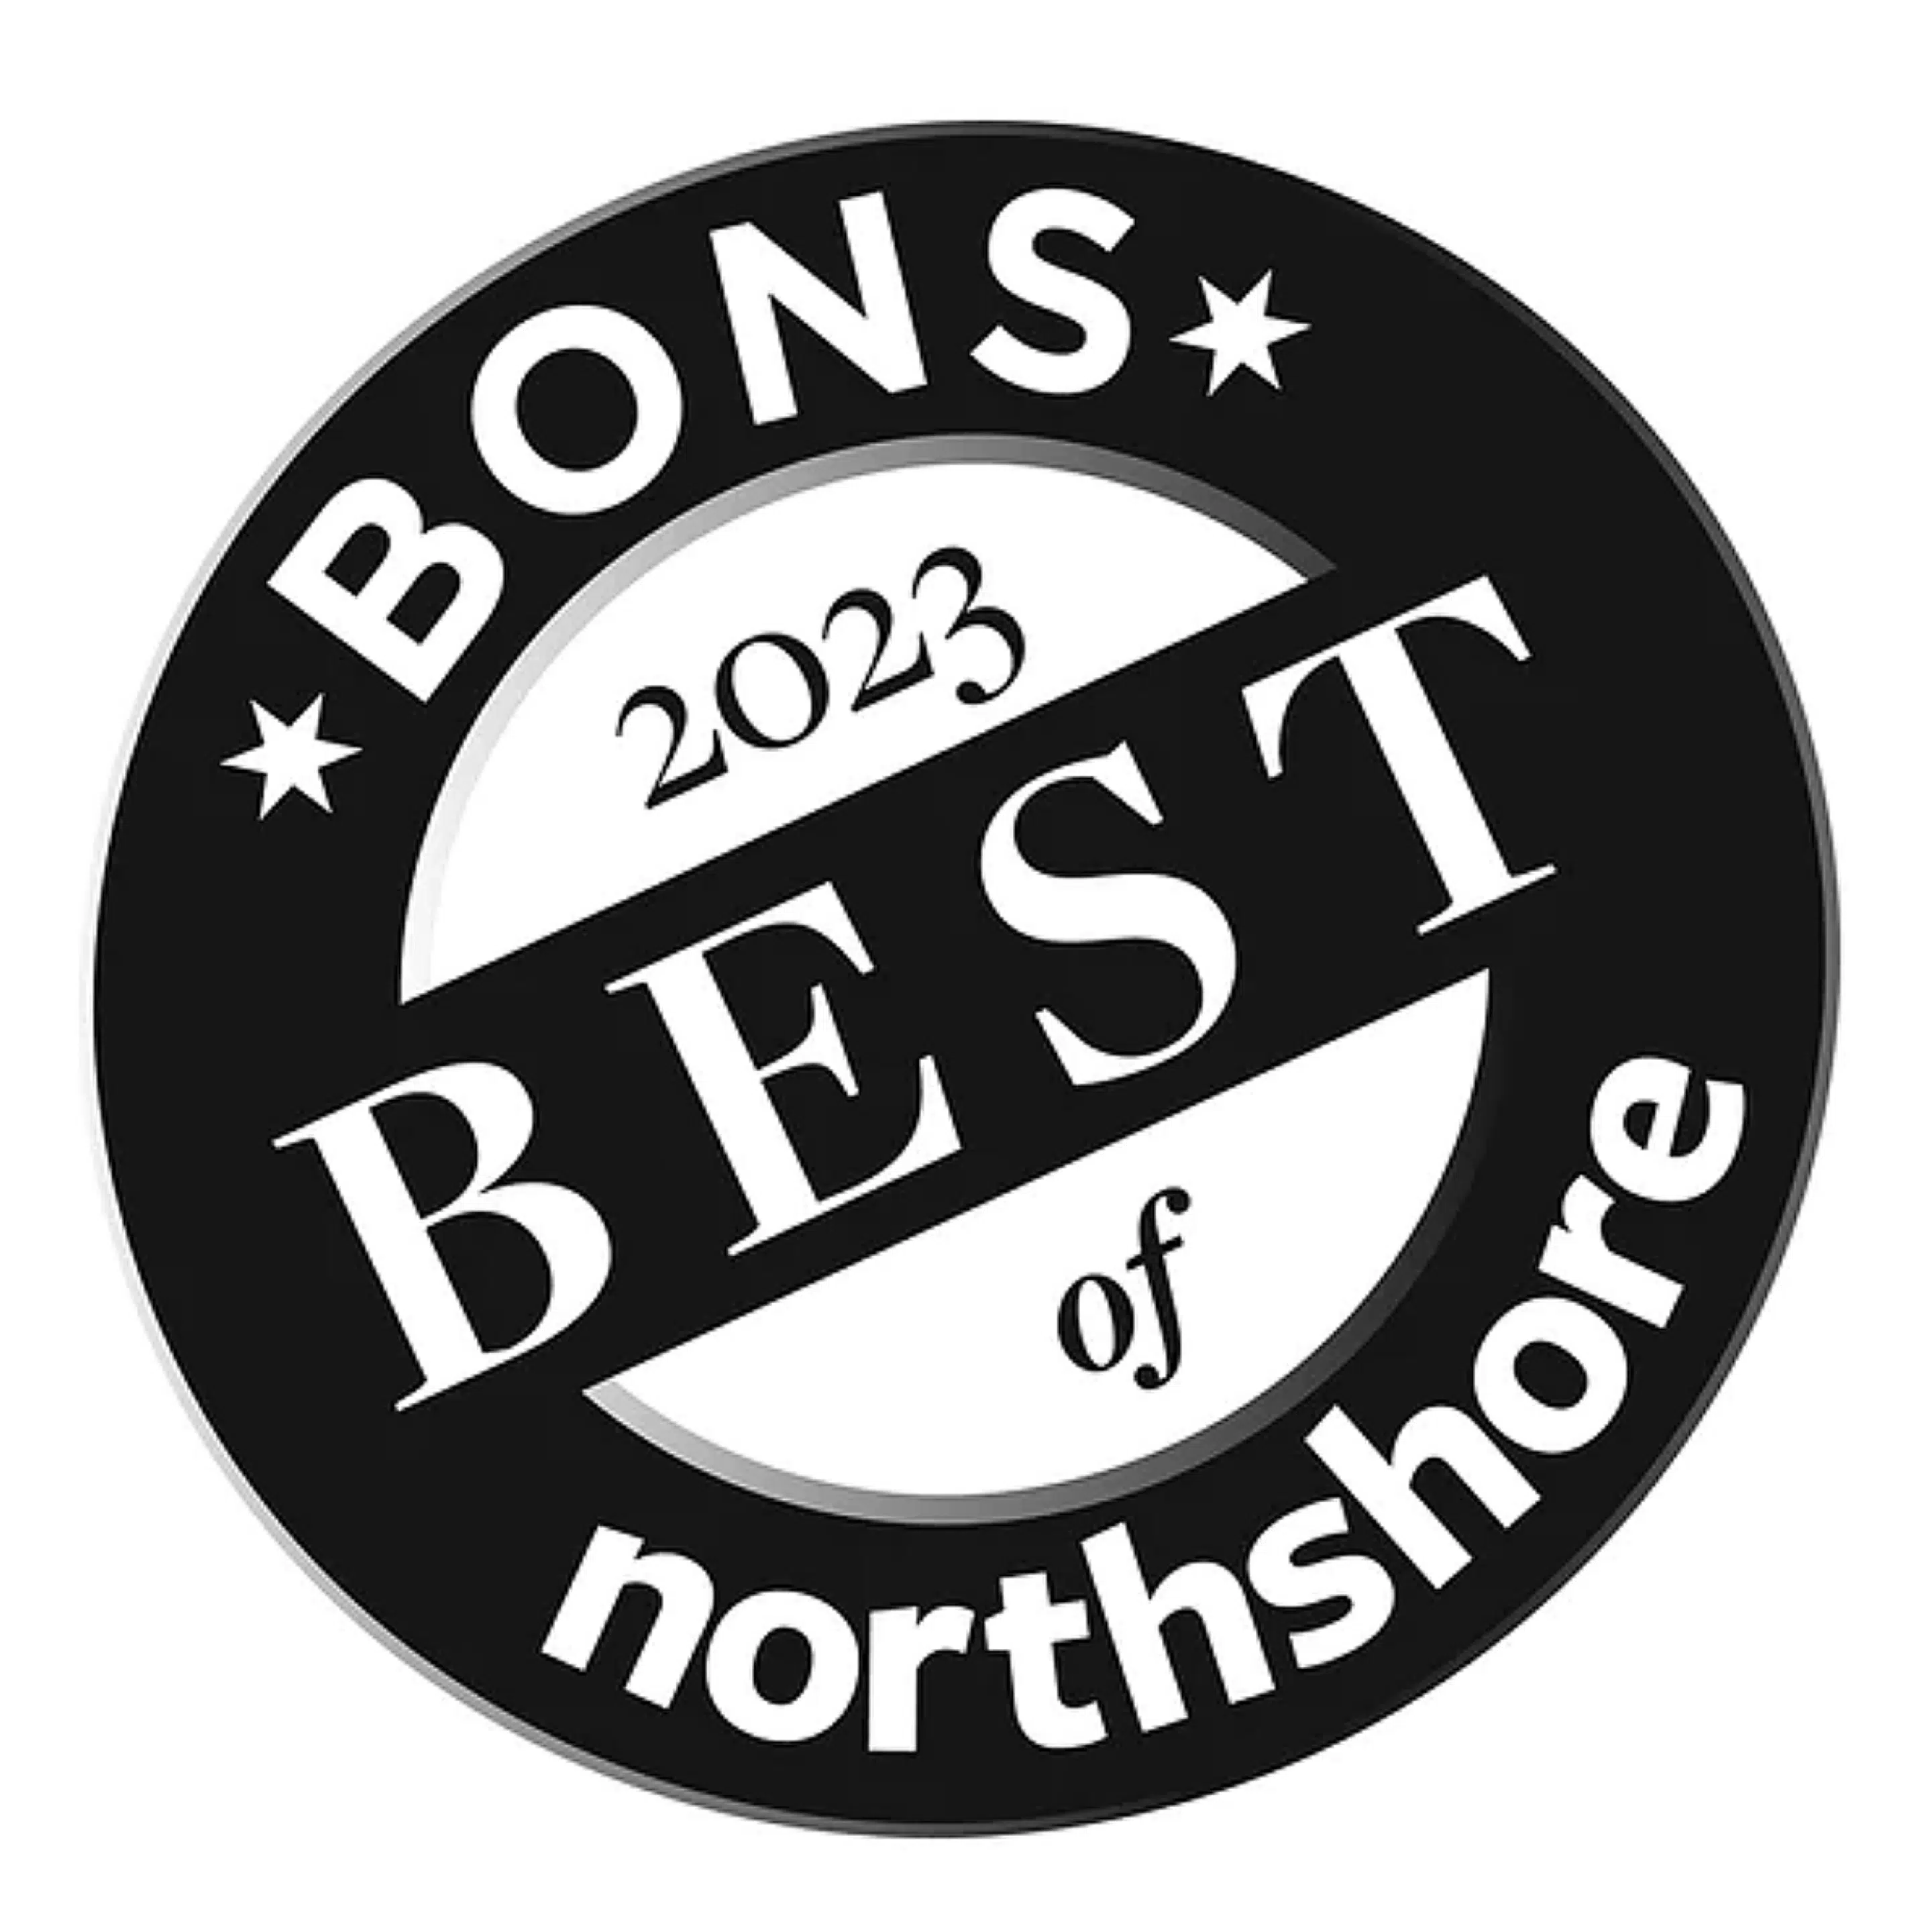 We are nationally-recognized as Allergan & Galderma Top 500 providers, Hydrafacial Black Diamond practice, ZO Skin Health Blue Diamond & the top Skin Better account in New England. Our practice has received 20+ Best of Northshore (BONS) awards including 'Best Med Spa' by Northshore Magazine since 2013.